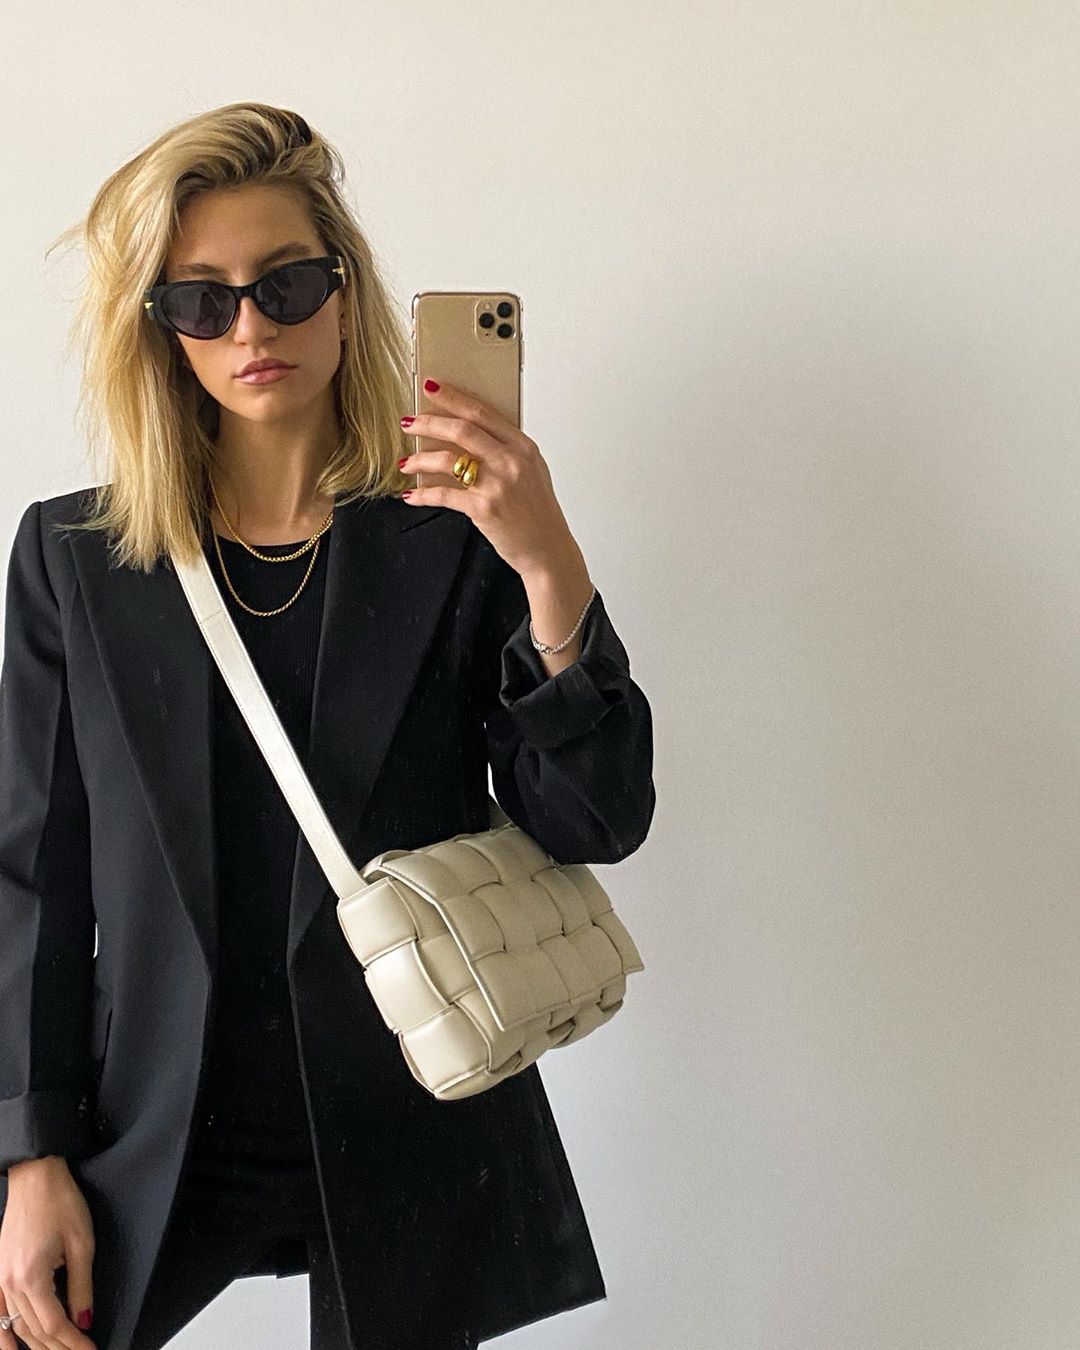 The best black T-shirt to wear with a blazer